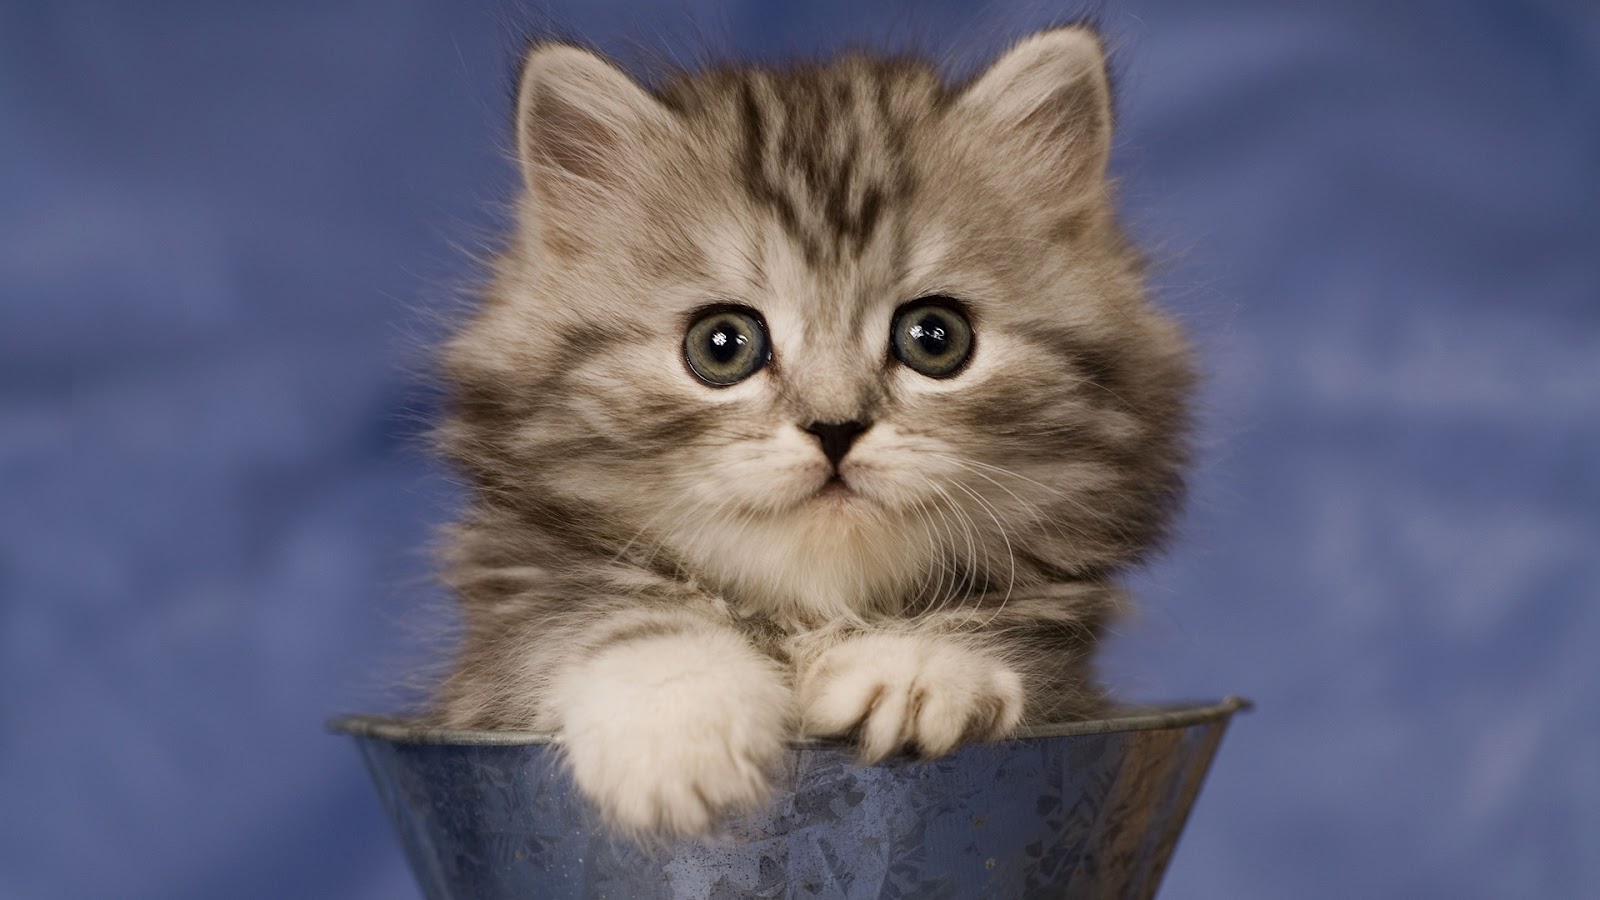 Kitten Super Cute Pictures Of Cats